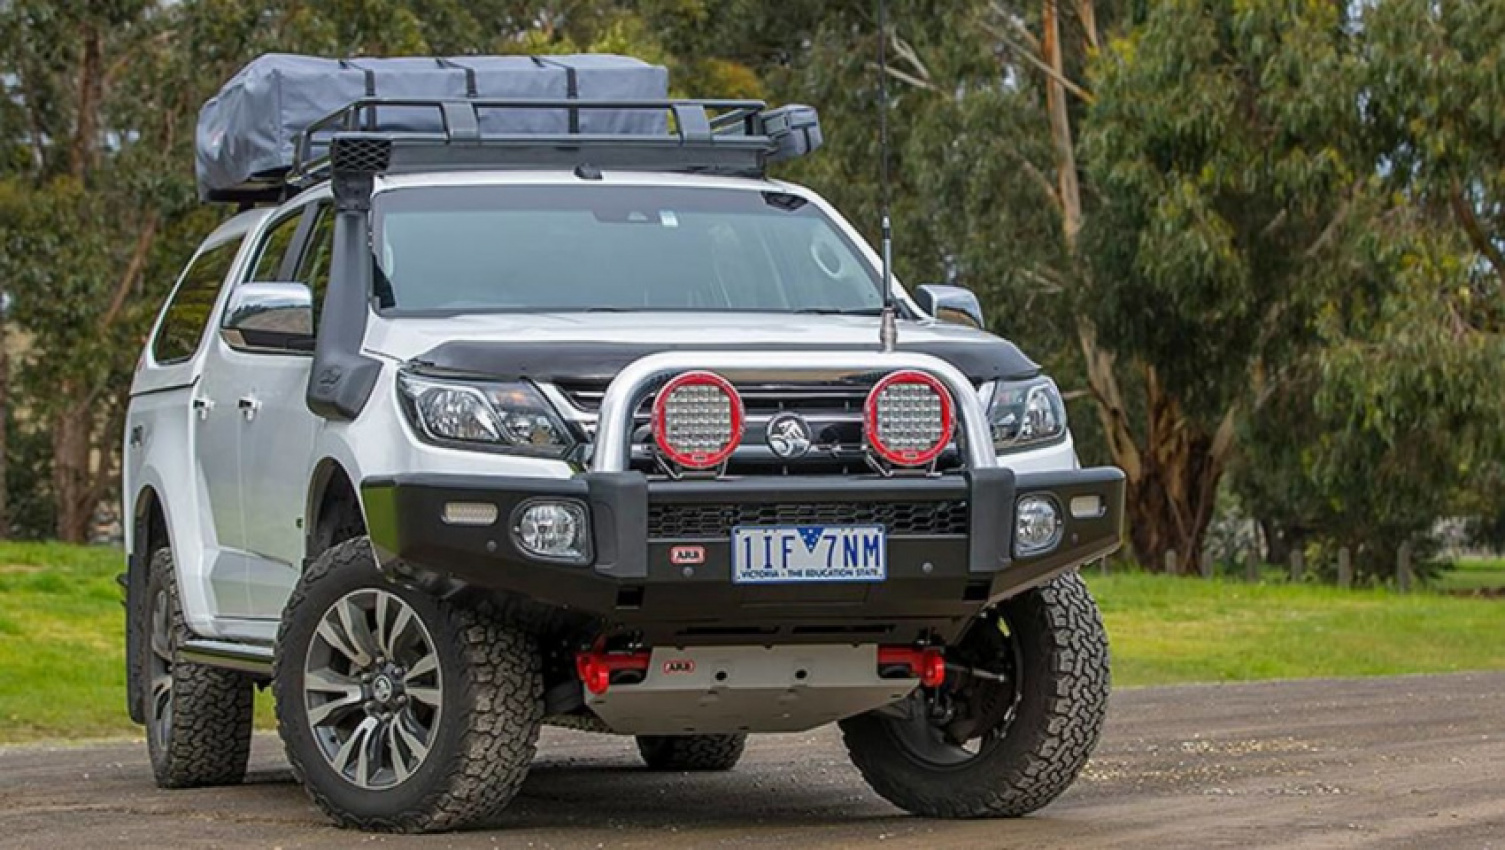 autos, cars, holden, reviews, commercial, holden advice, holden colorado, holden colorado reviews, holden commercial range, holden ute range, tradie advice, vnex, the best canopies for your holden colorado